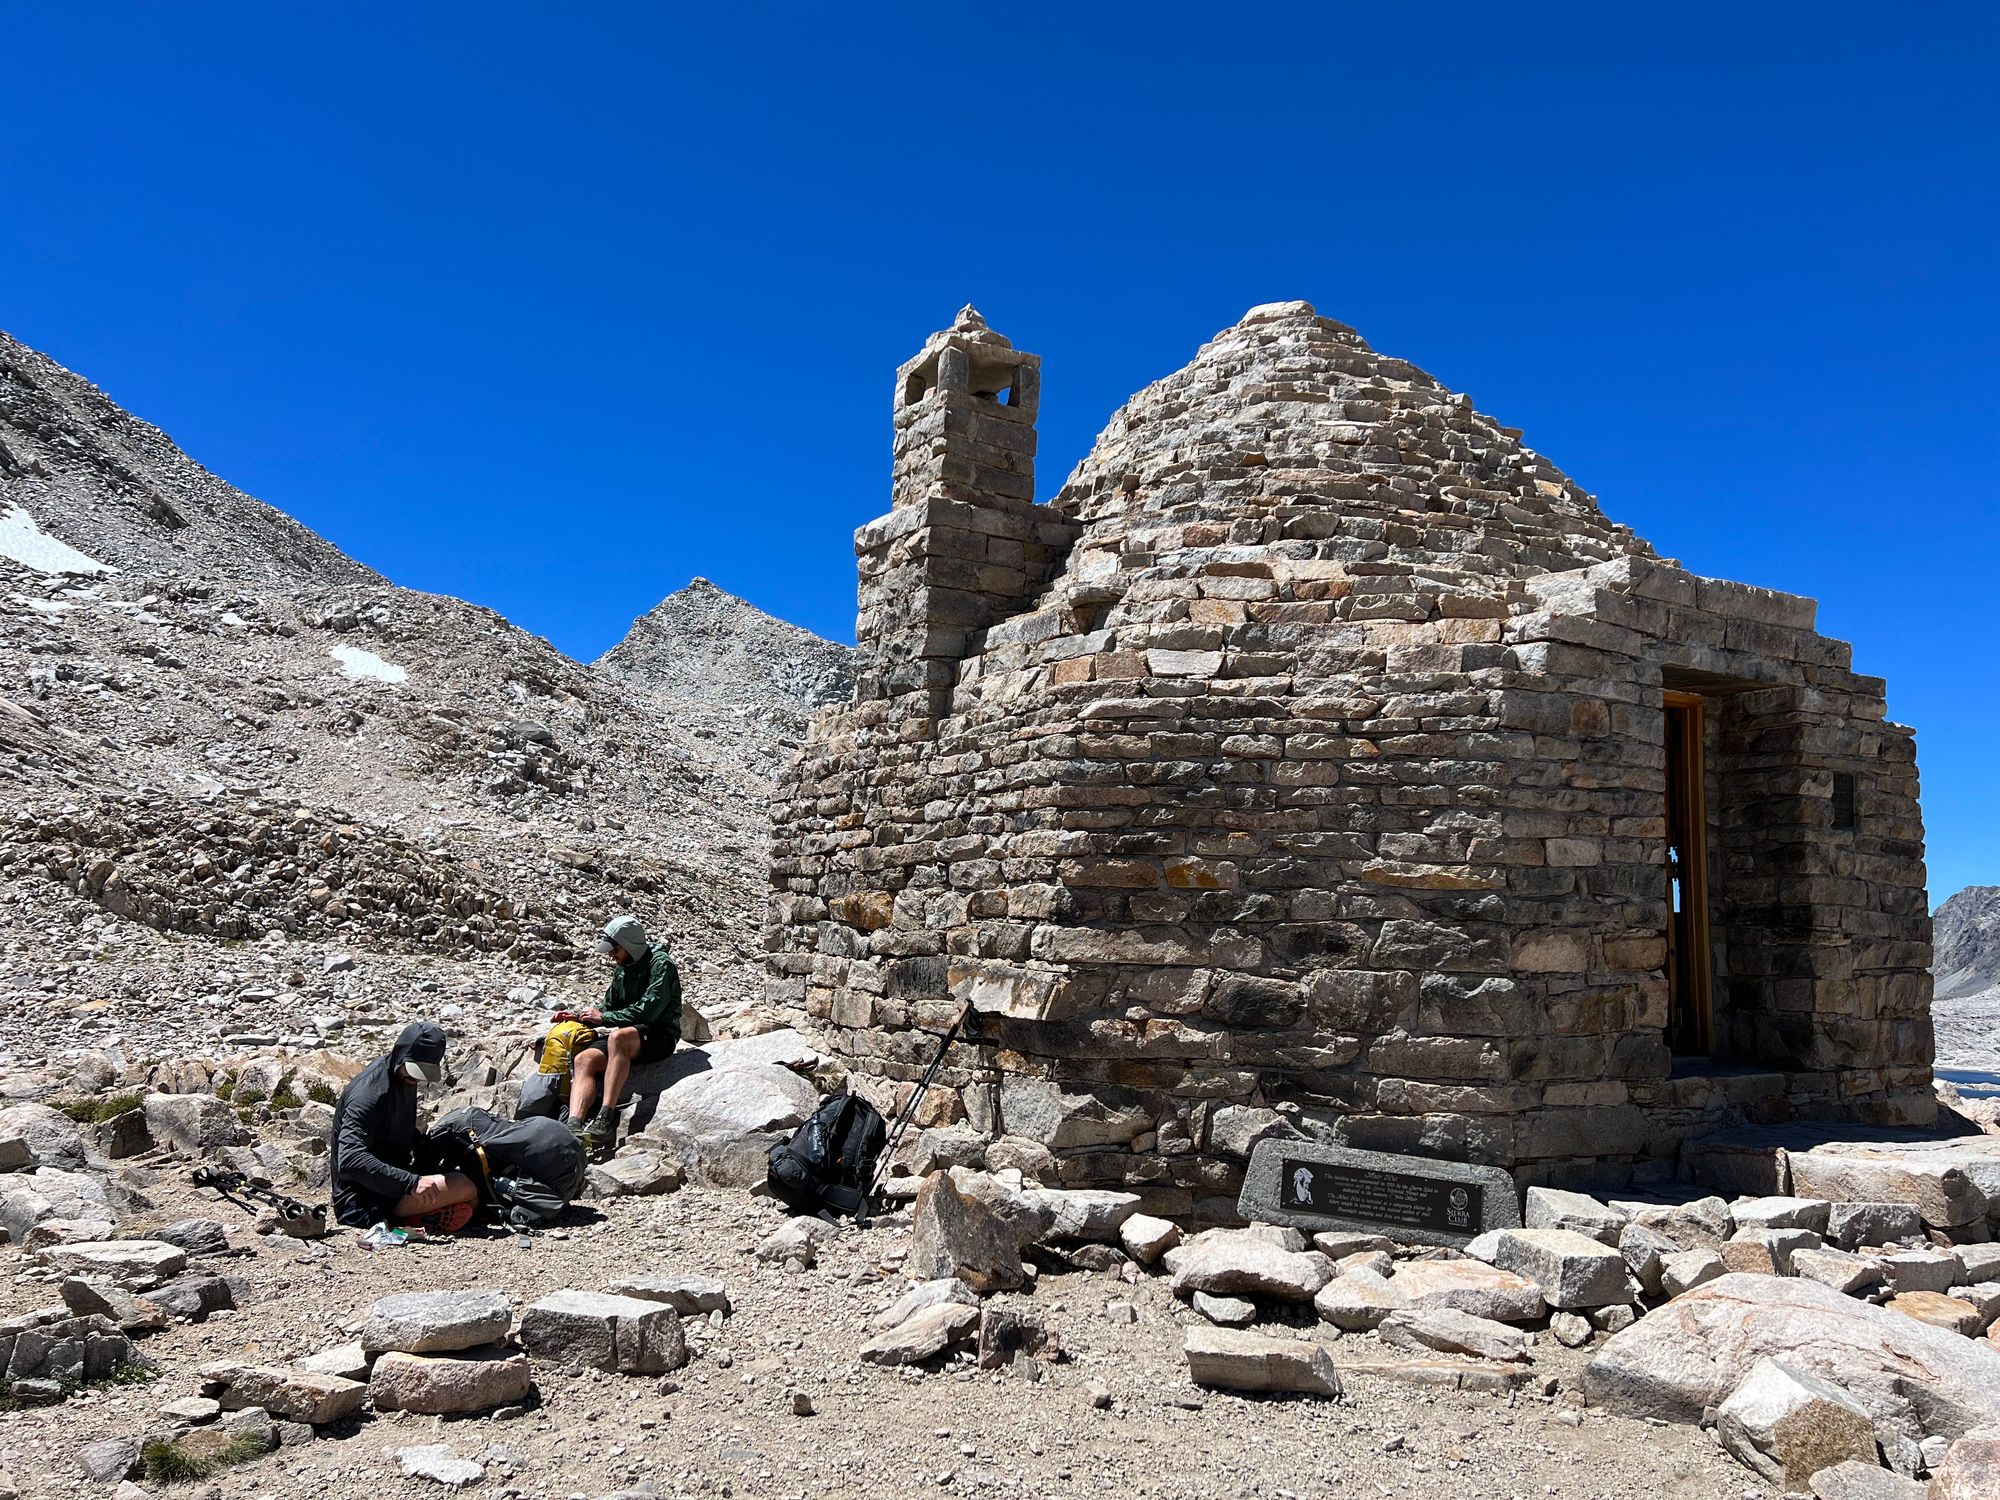 Two backpackers sitting outside a stone hut.